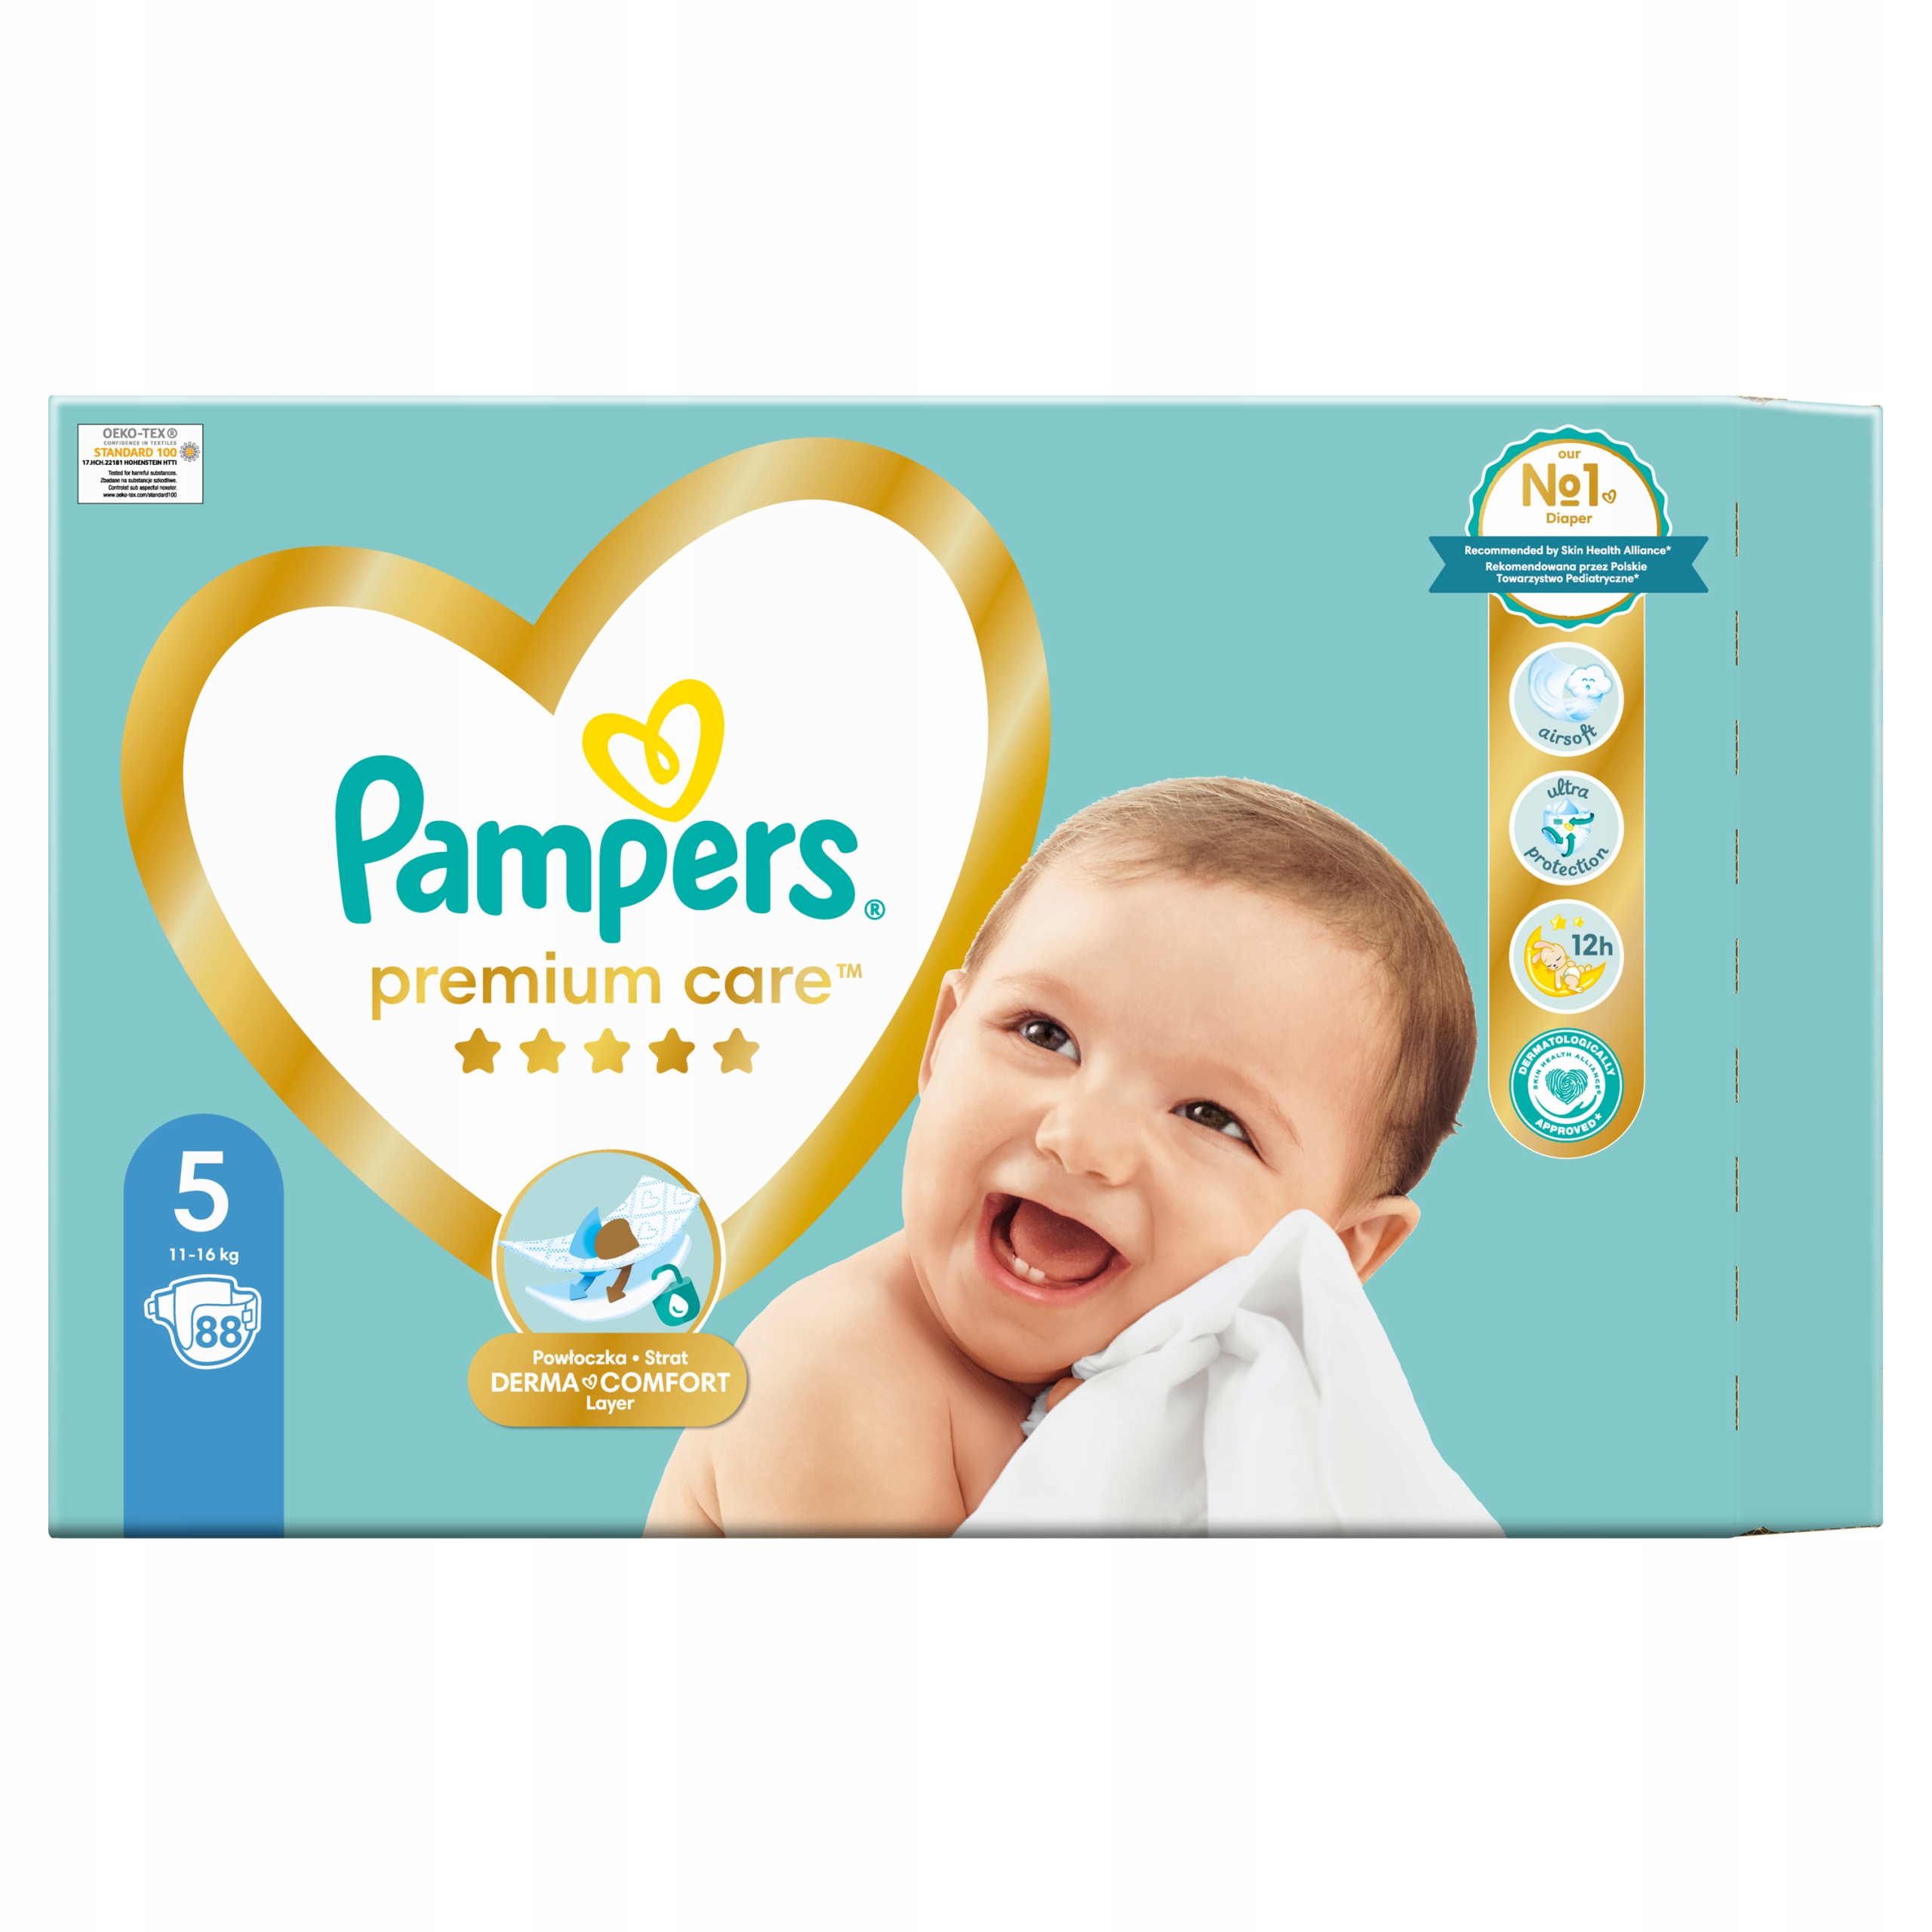 pampers 3 ceneo carrefour